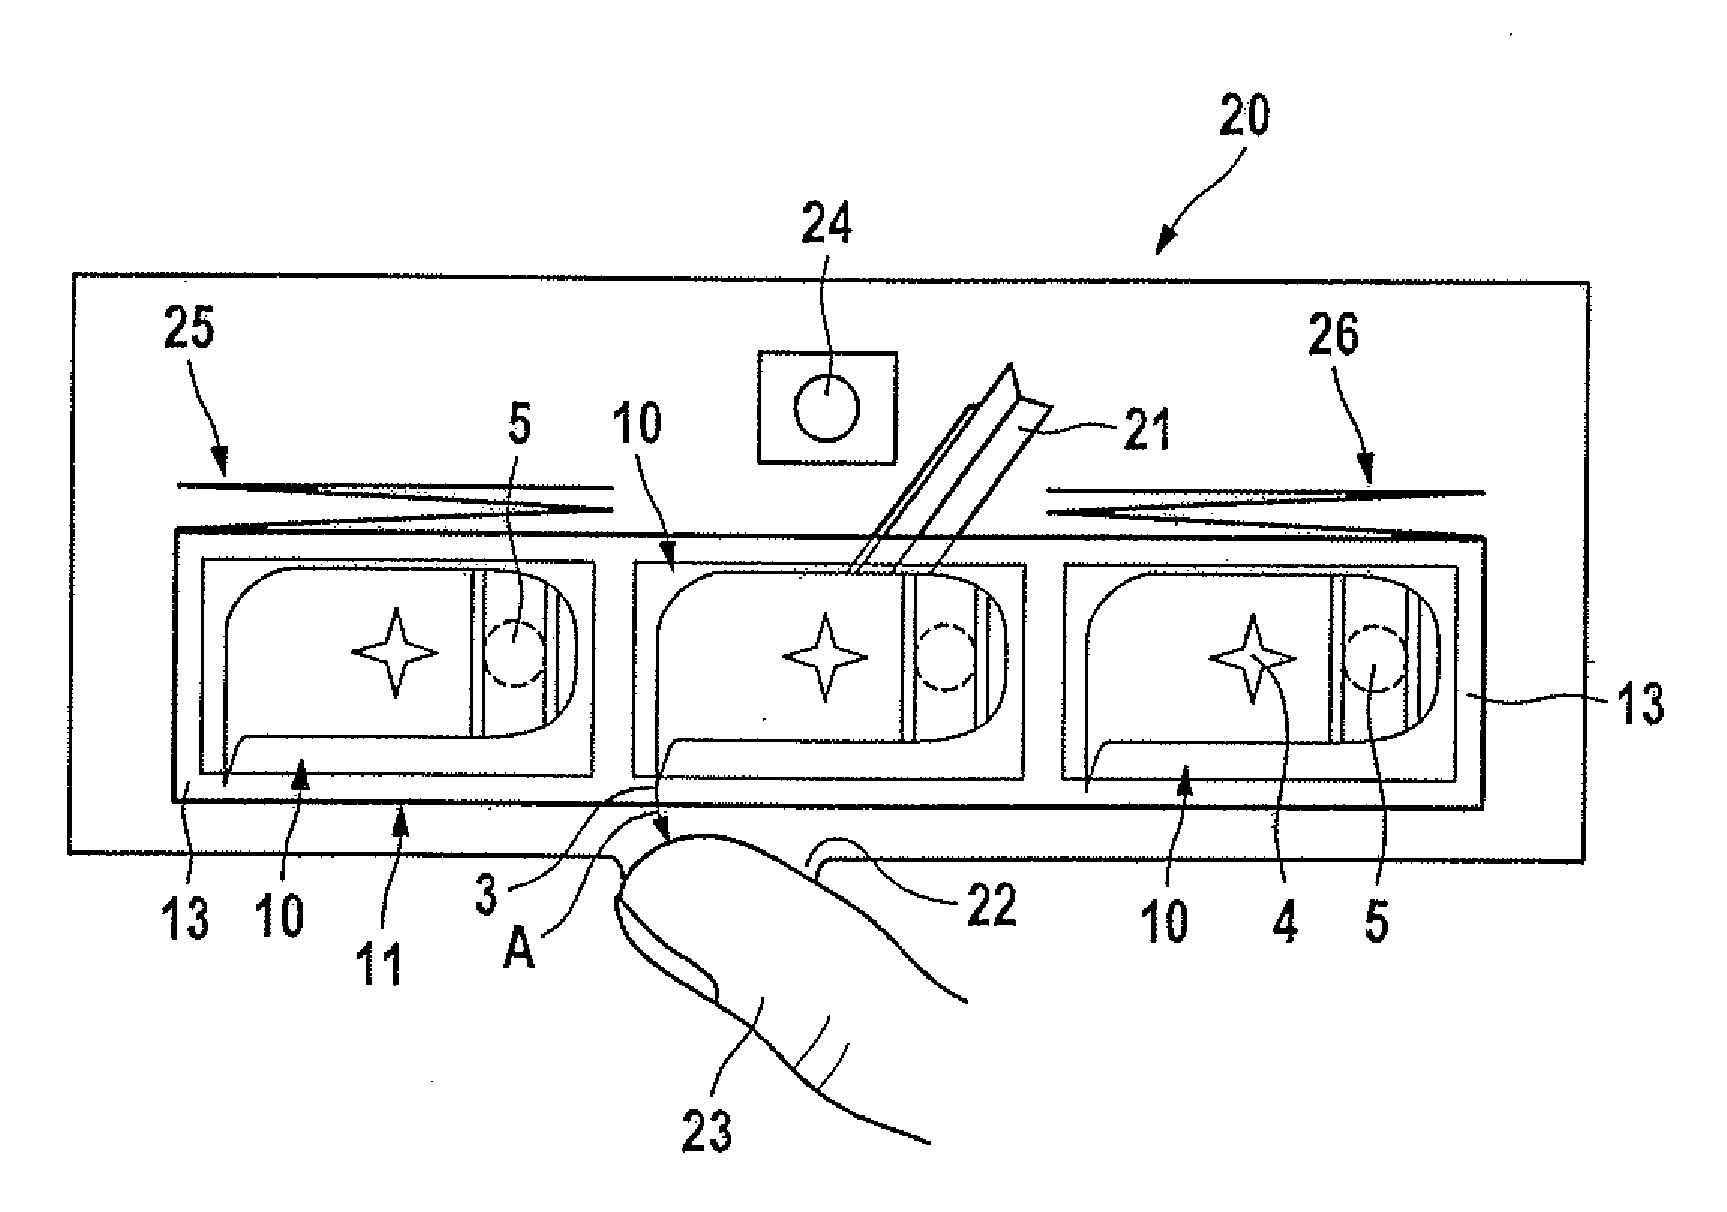 Lancet, Lancet Supply Ribbon, and Puncturing Device for Generating a Puncturing Wound